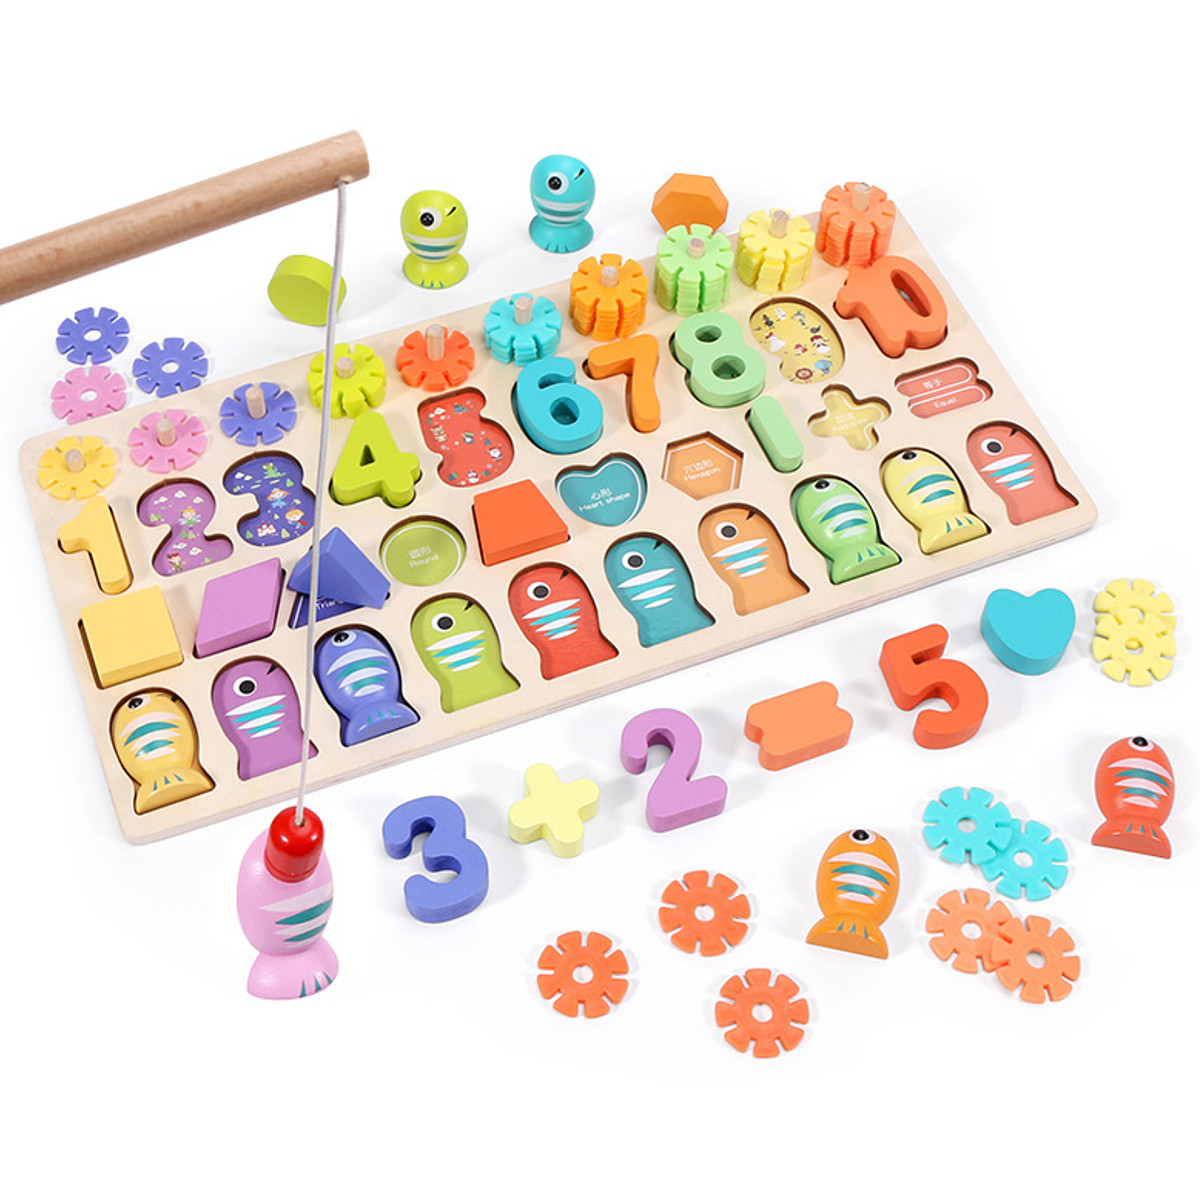 345-IN-1-Wooden-NumbersFruit-Jigsaw-Math-Puzzle-Kids-Learning-Educational-Set-Toys-1670908-3